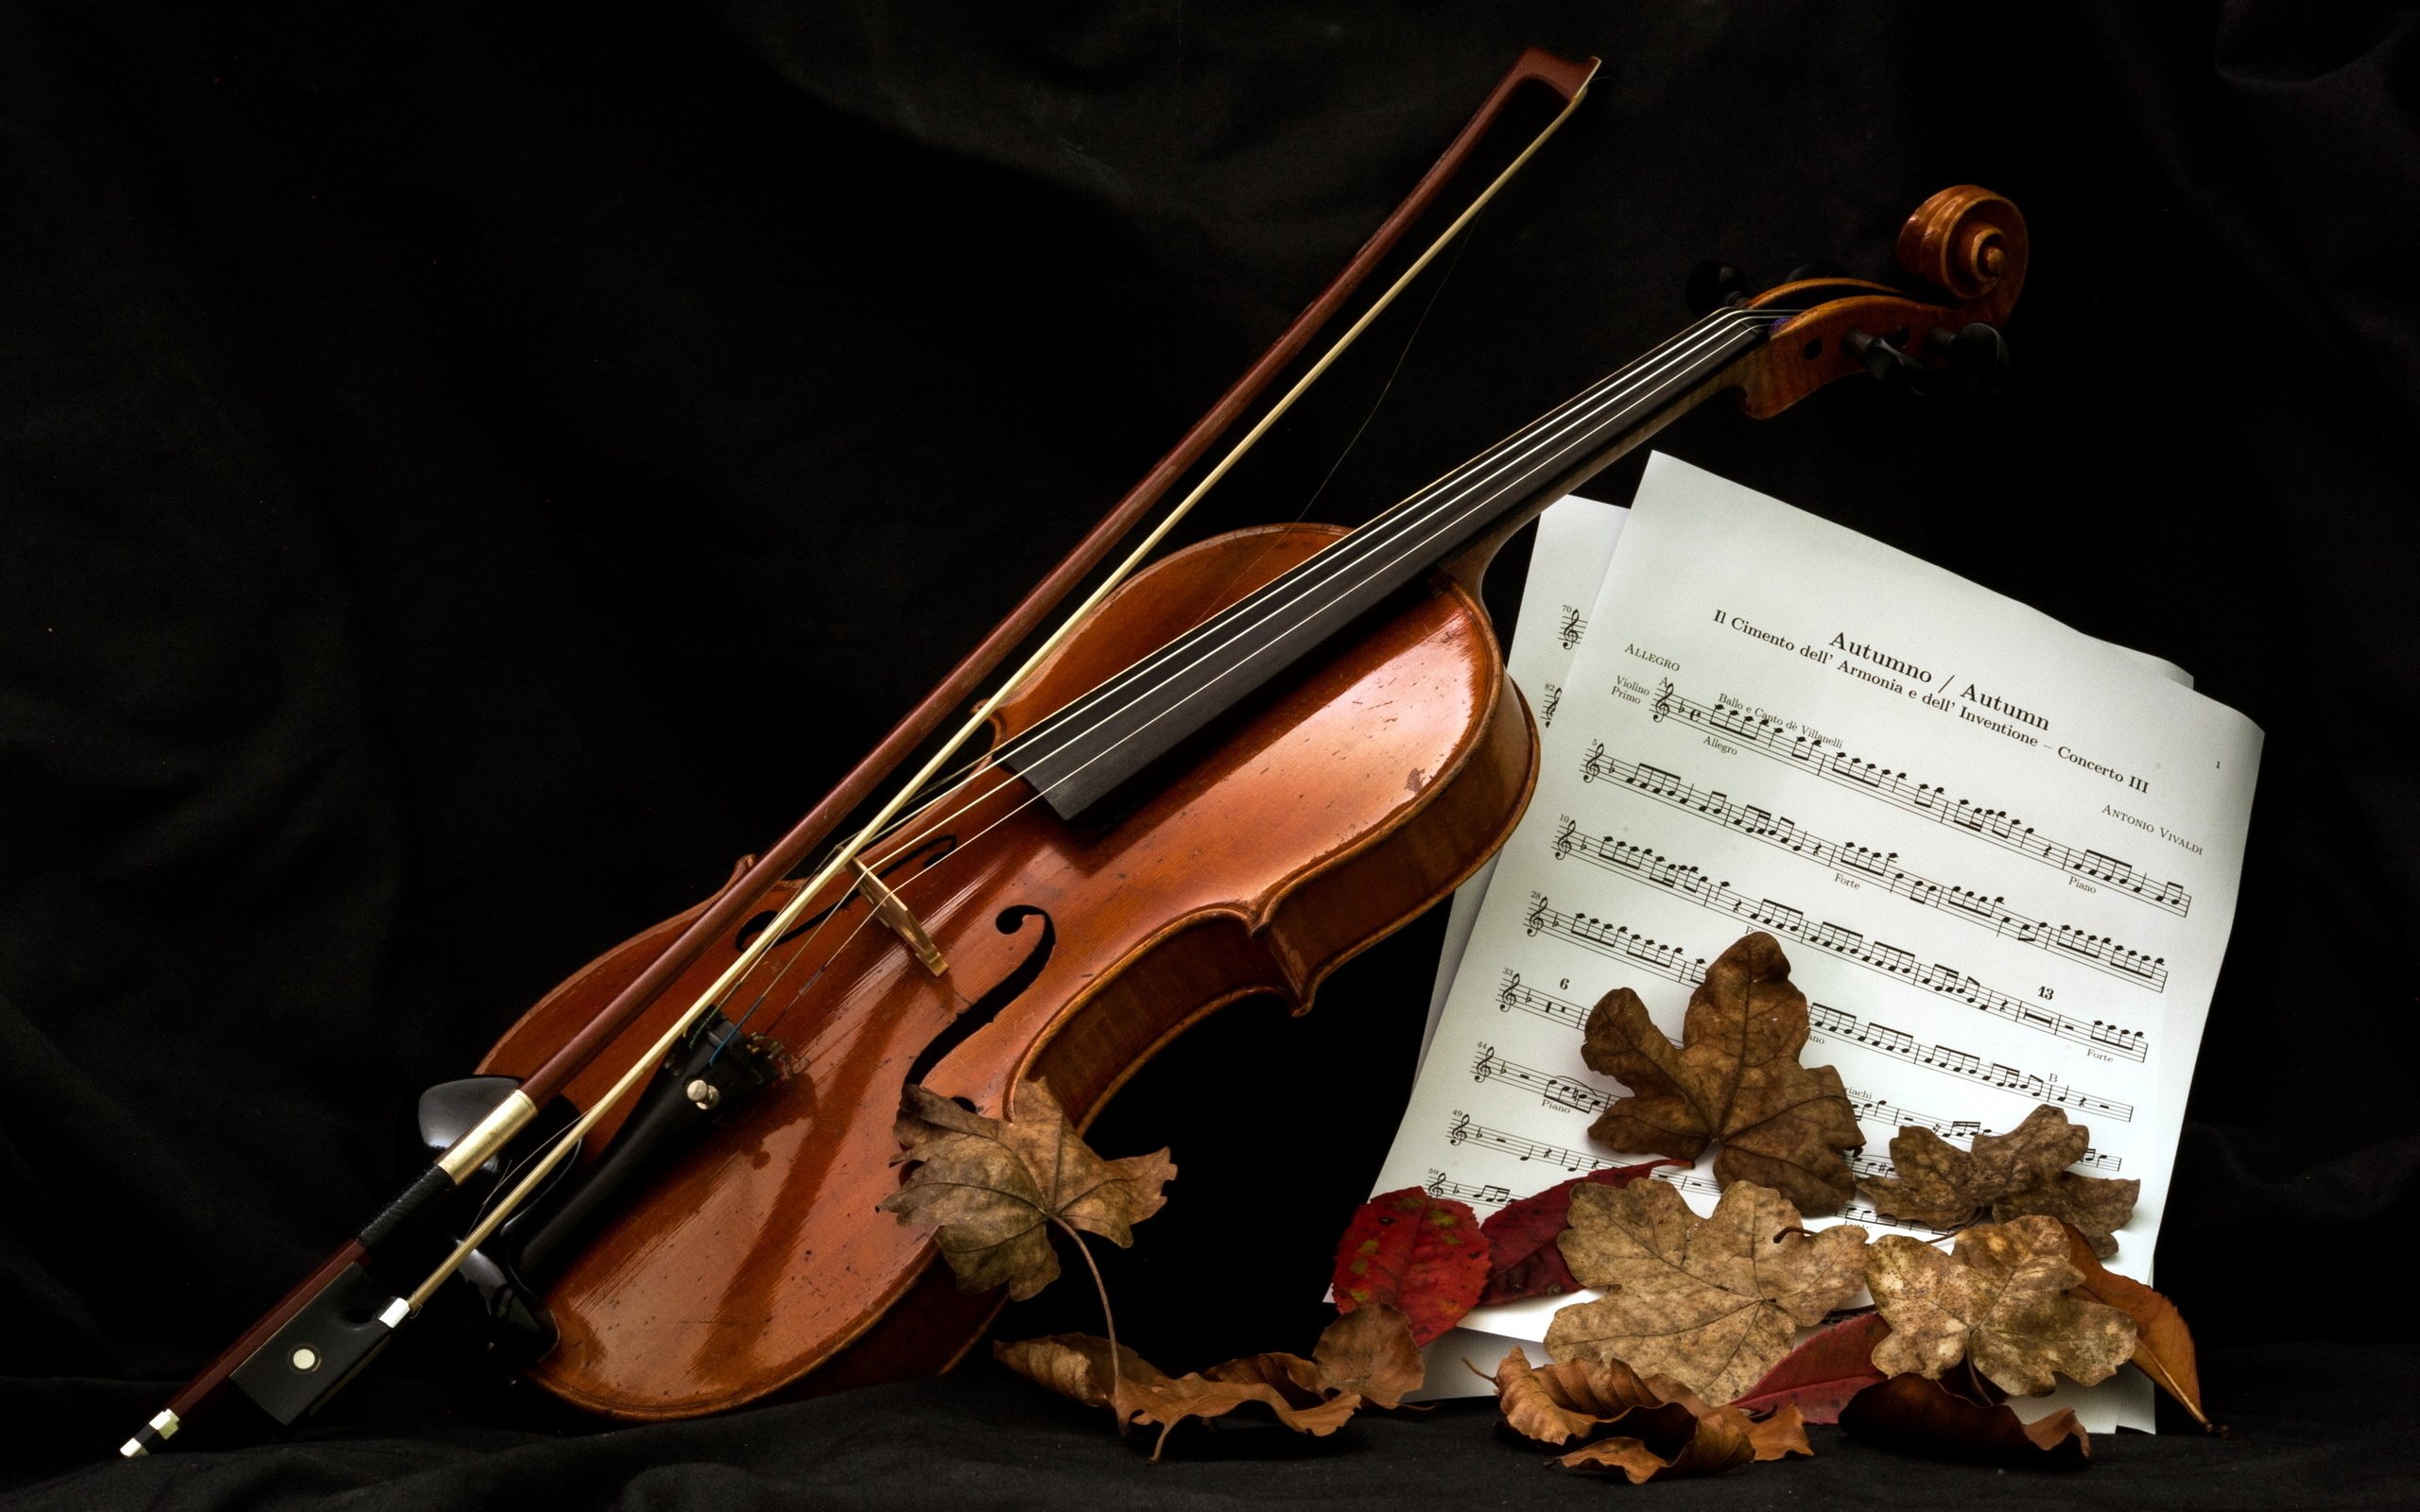 Autumn Leaves With Music Notes - HD Wallpaper 